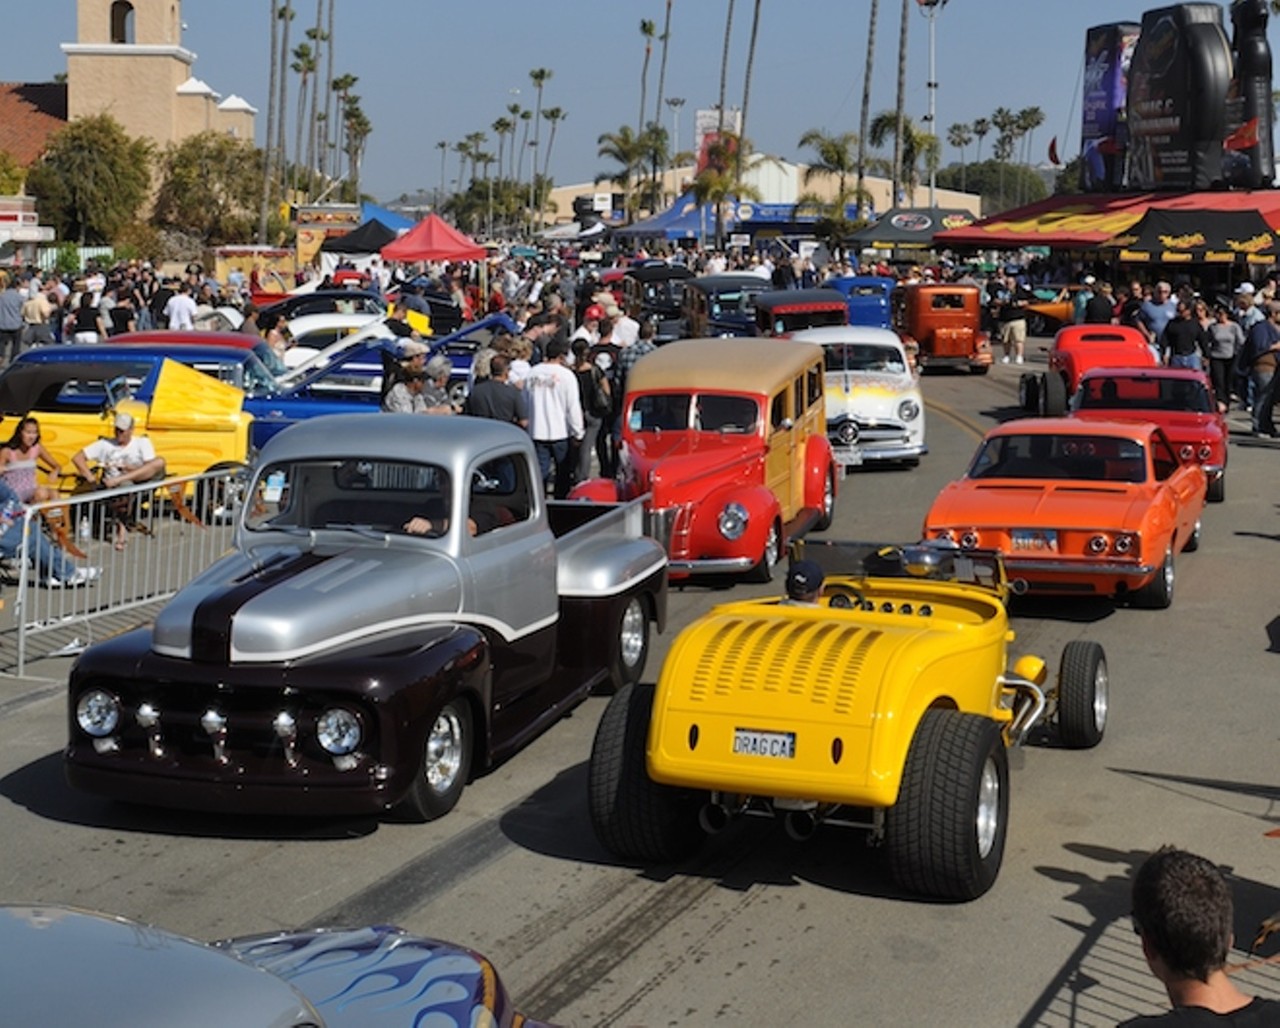 Friday, April 25 - Sunday, April 27The Goodguys All American NationalsMore than 1,500 cars on display, vendors, swap meet and car corral, live music and more.